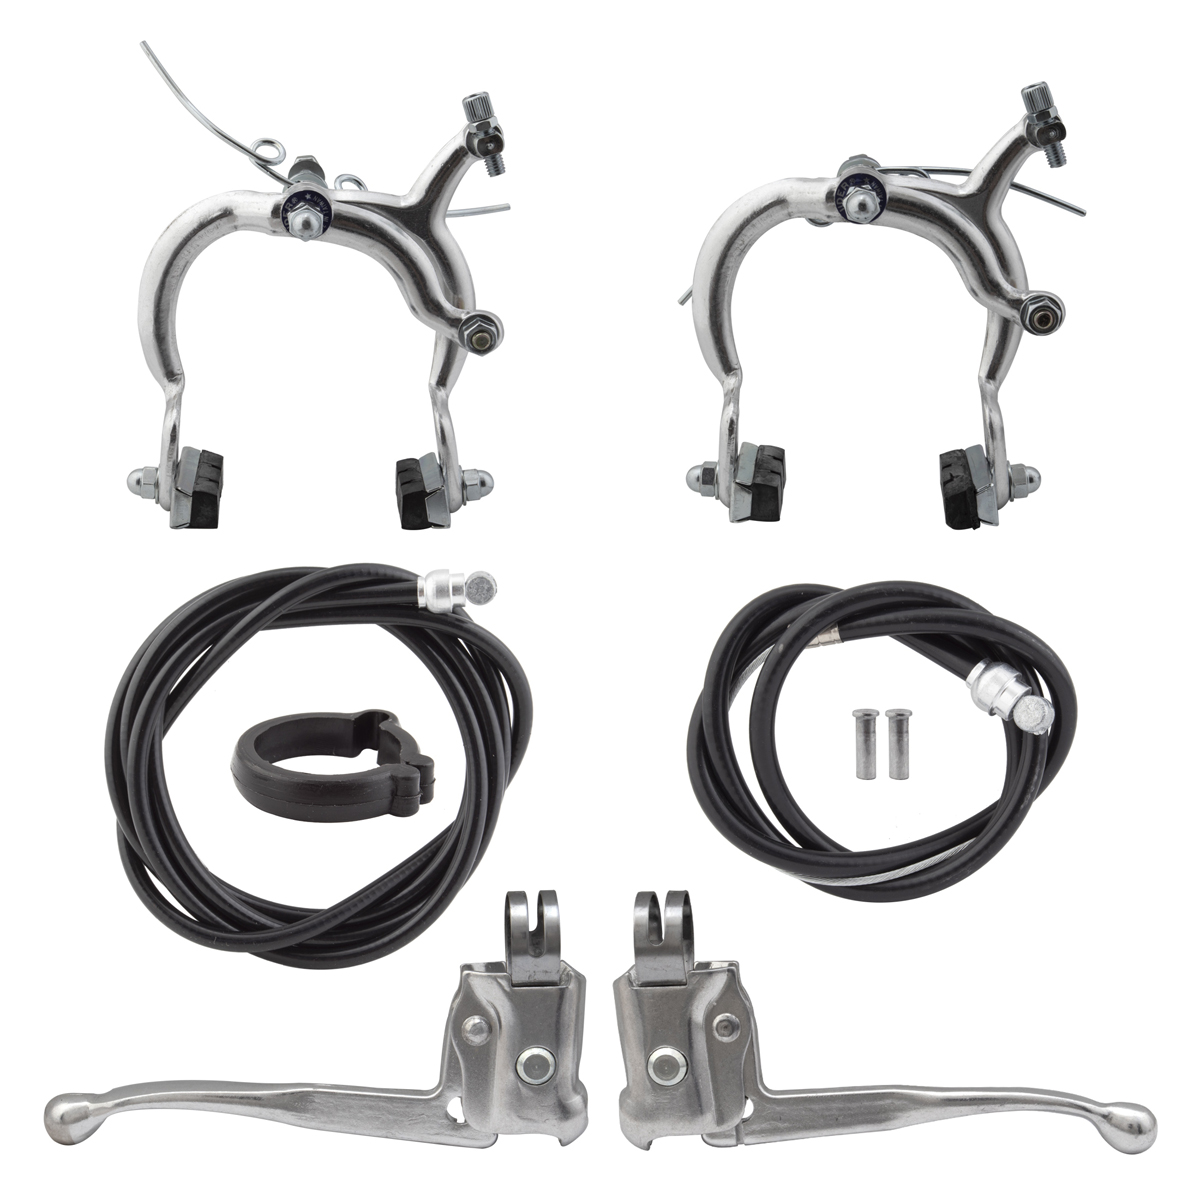 Brakeset Alloy front and rear calipers with levers (silver)